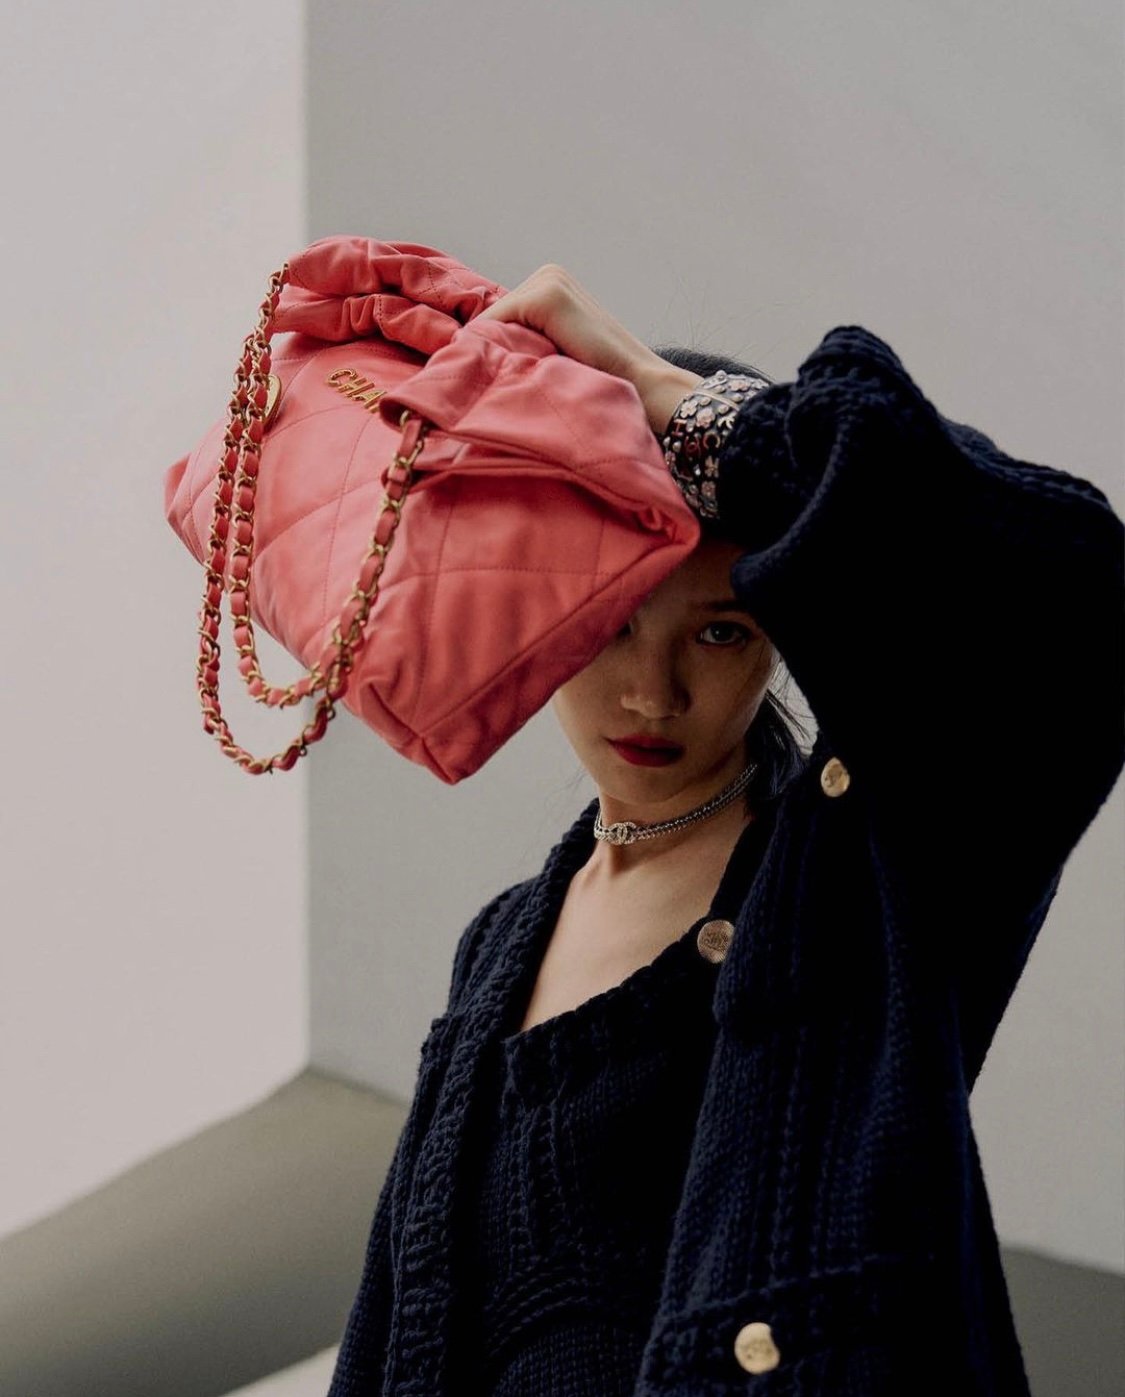 MANIFESTO - NOW ALL YOU NEED ARE SOME DOLLAR BILLS: Chanel 22 Bag